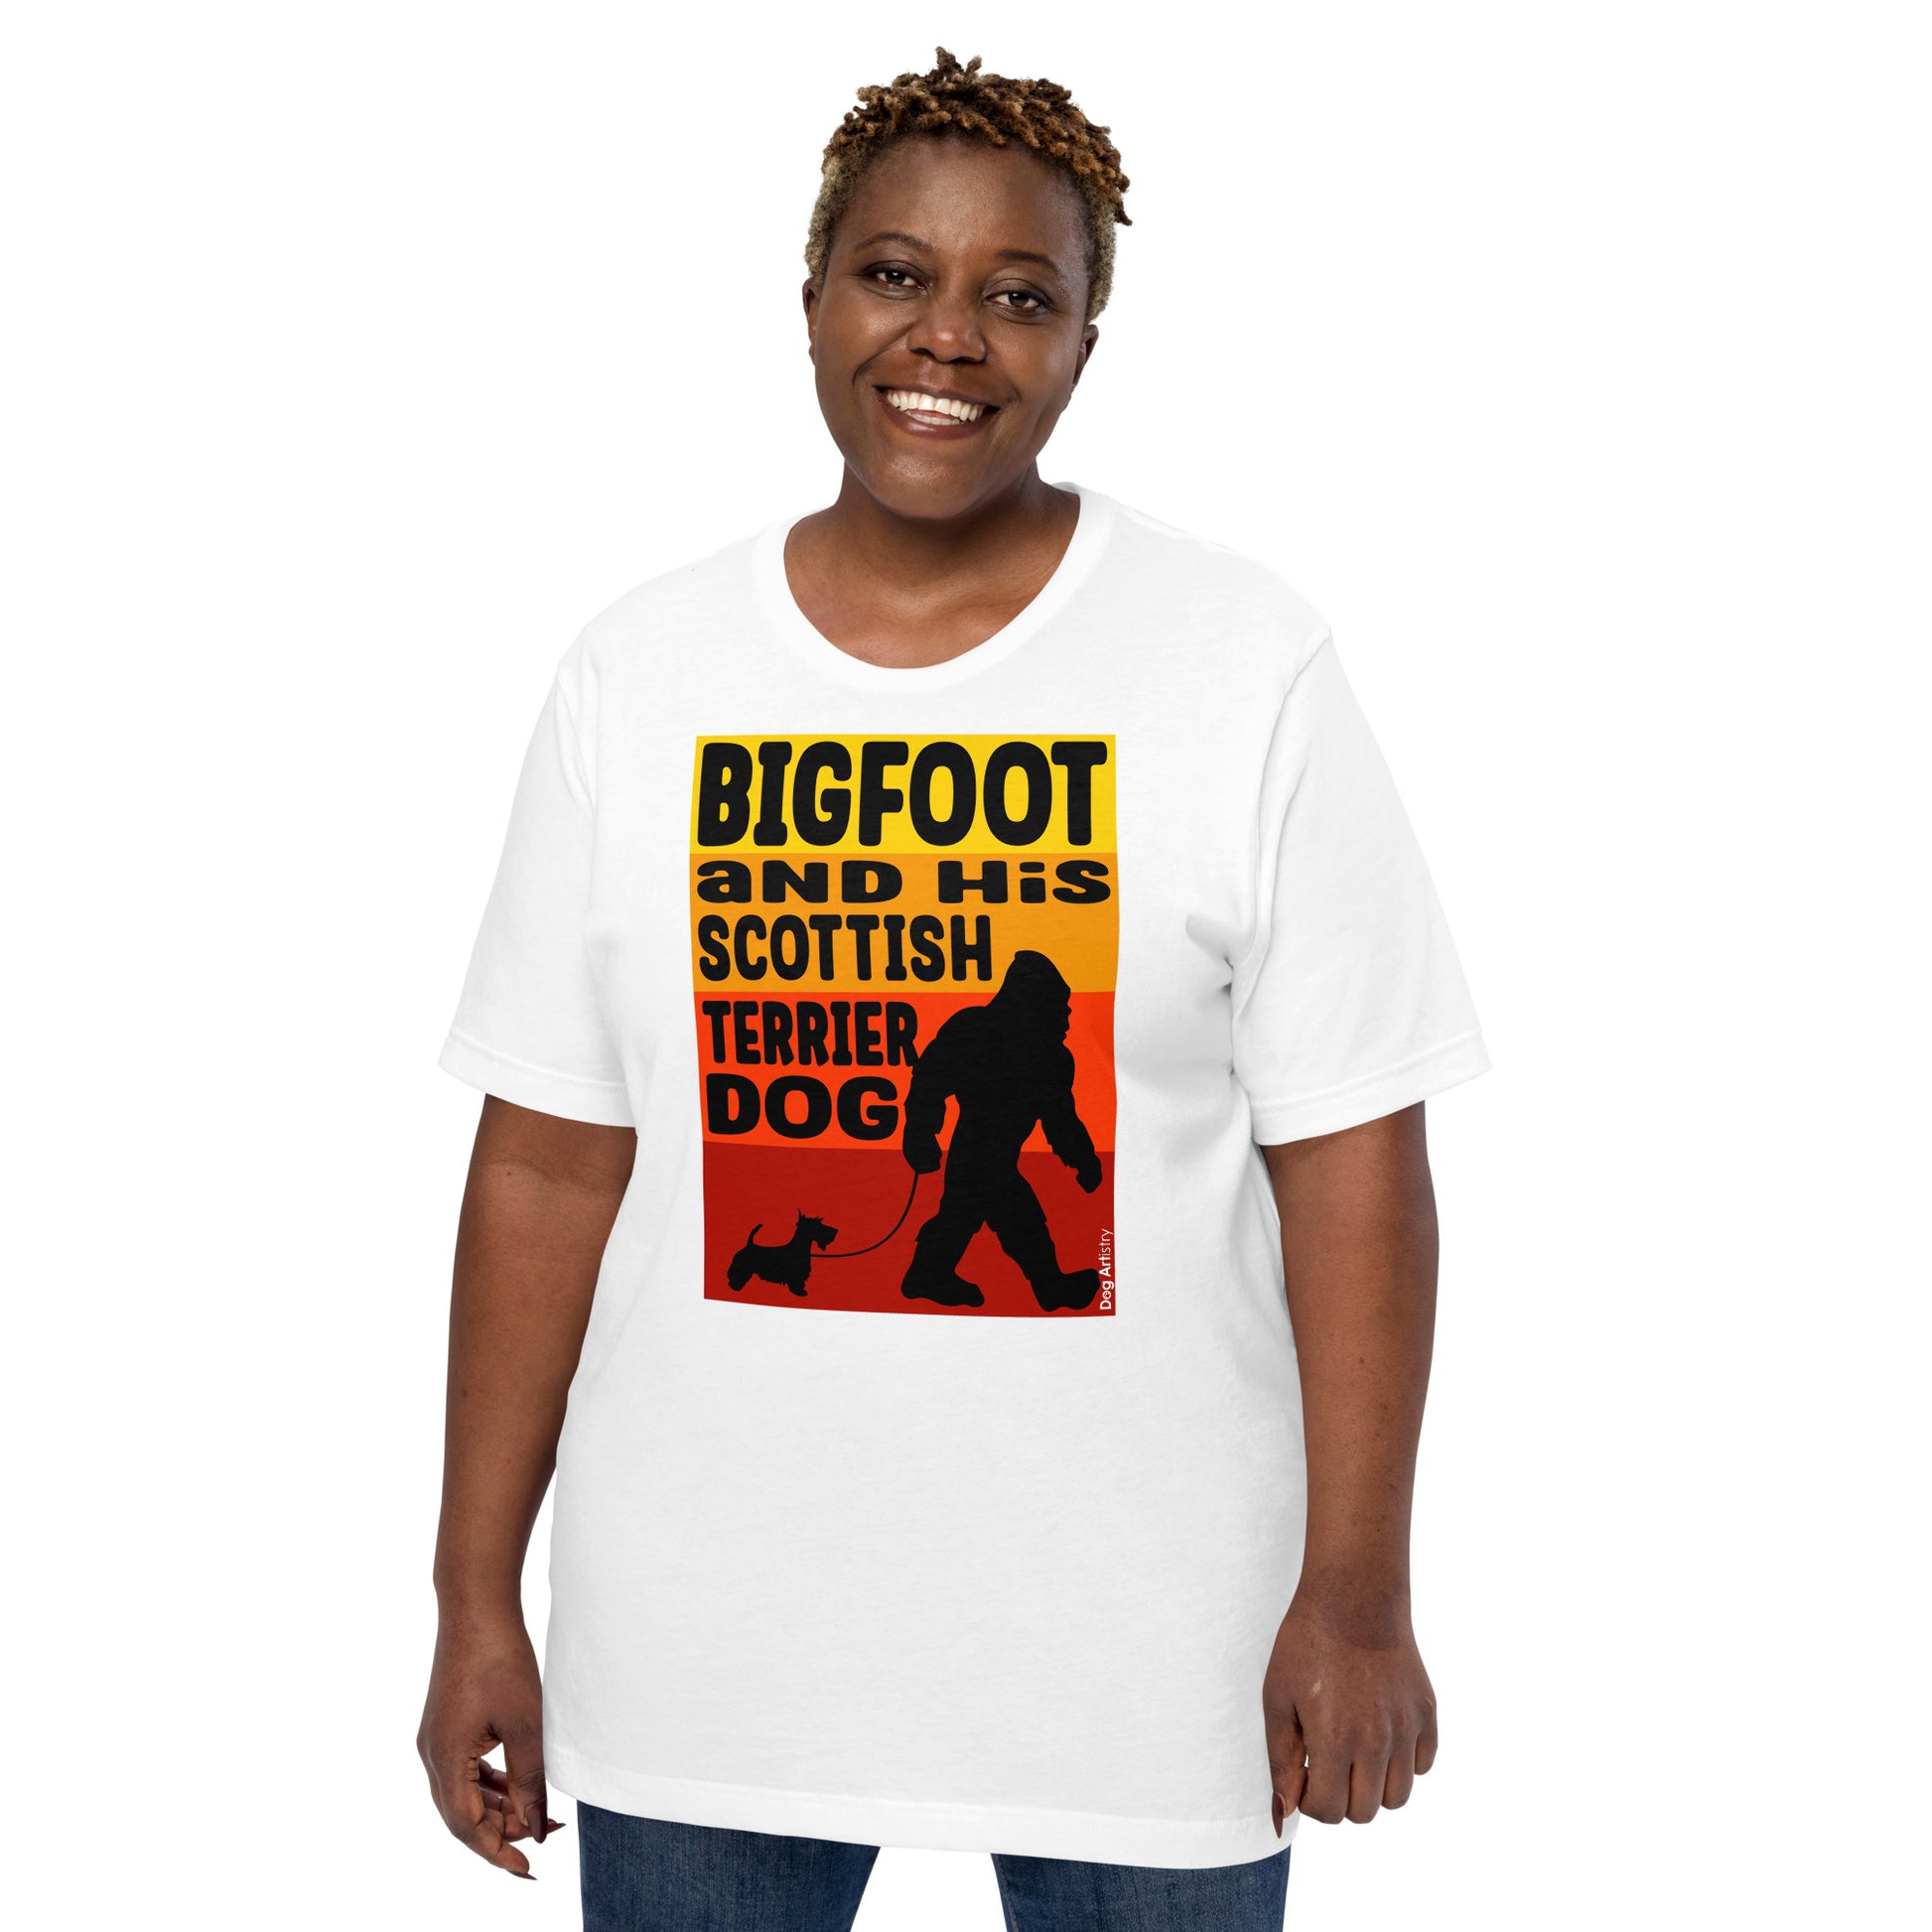 Bigfoot and his Scottish Terrier dog unisex white t-shirt by Dog Artistry.